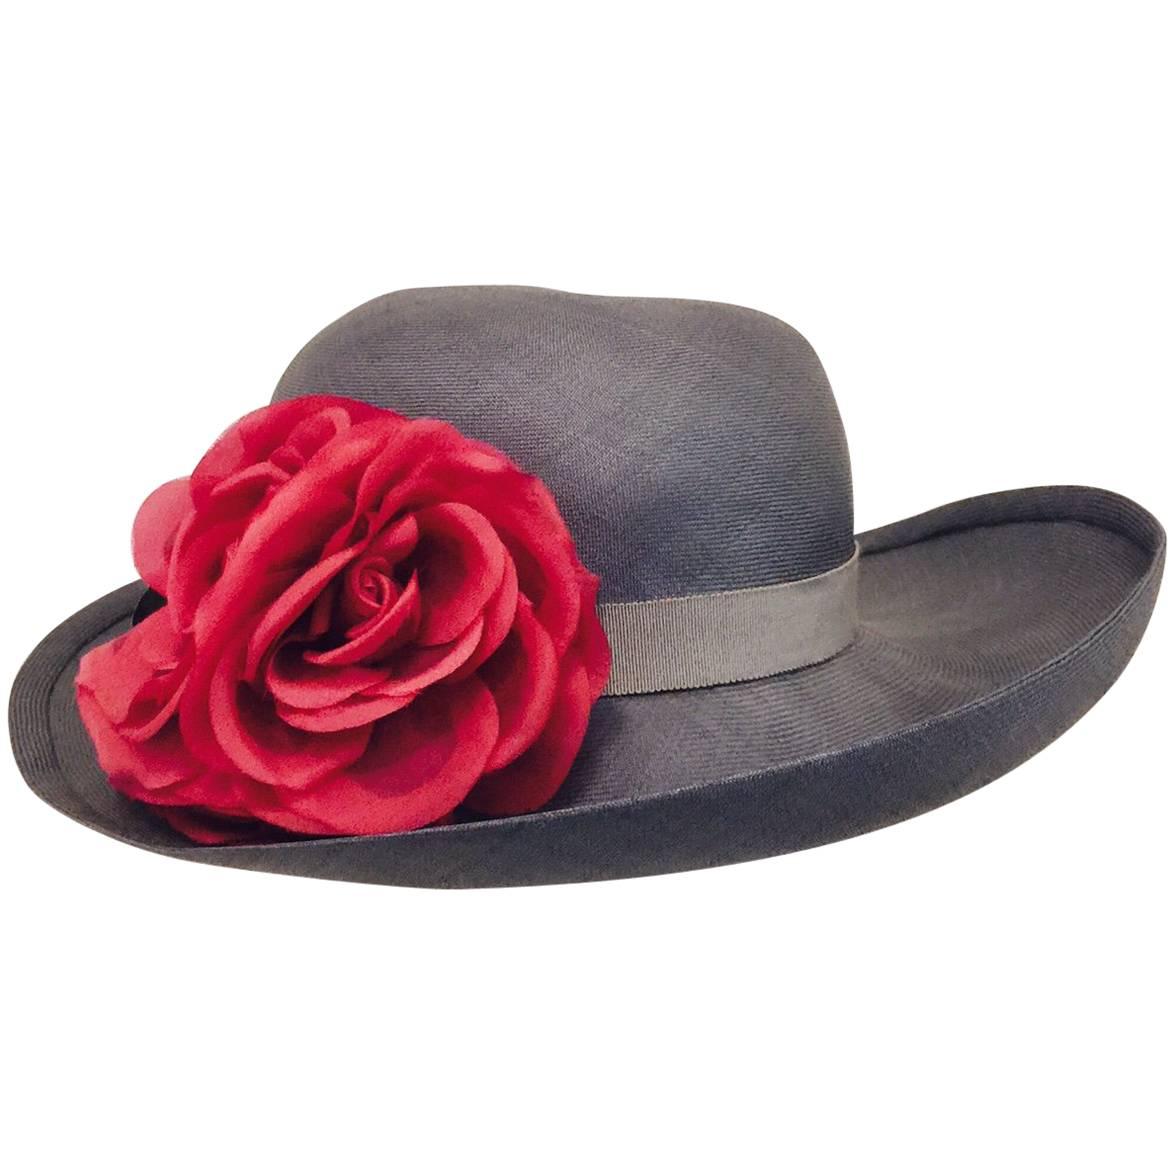 Tres Chic Chanel Light Blue Hat Accentuated With 3 Red Roses